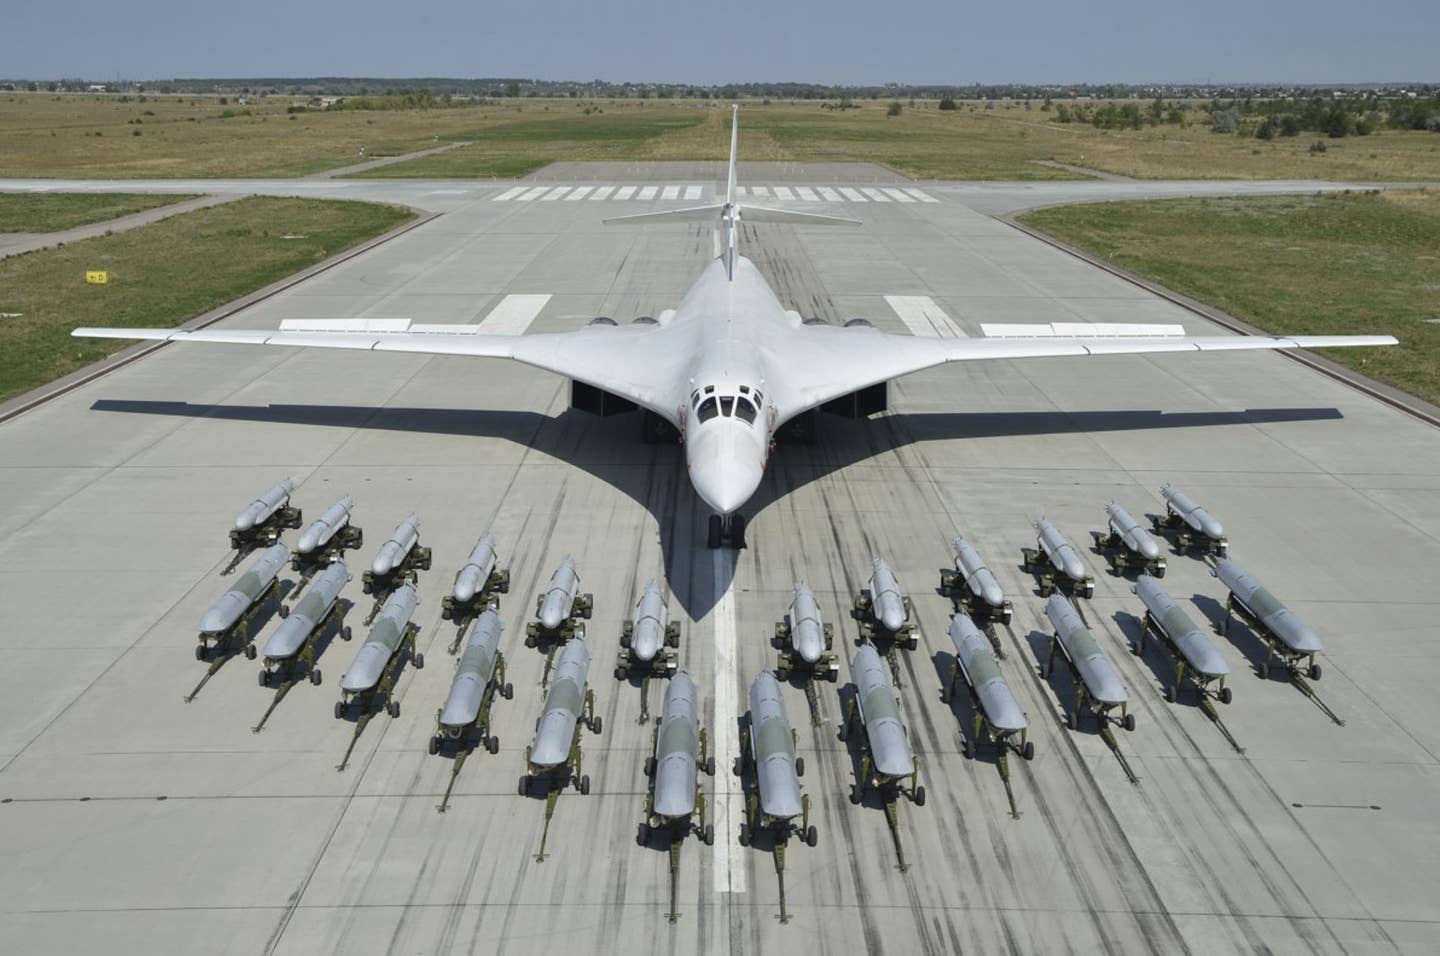 A row of 12 Kh-101/102-series air-launched cruise missiles, in front, and another dozen of the earlier Kh-55-series missiles behind them, on display with a Tu-160 bomber in the background.&nbsp;<em>Russian Ministry of Defense</em>